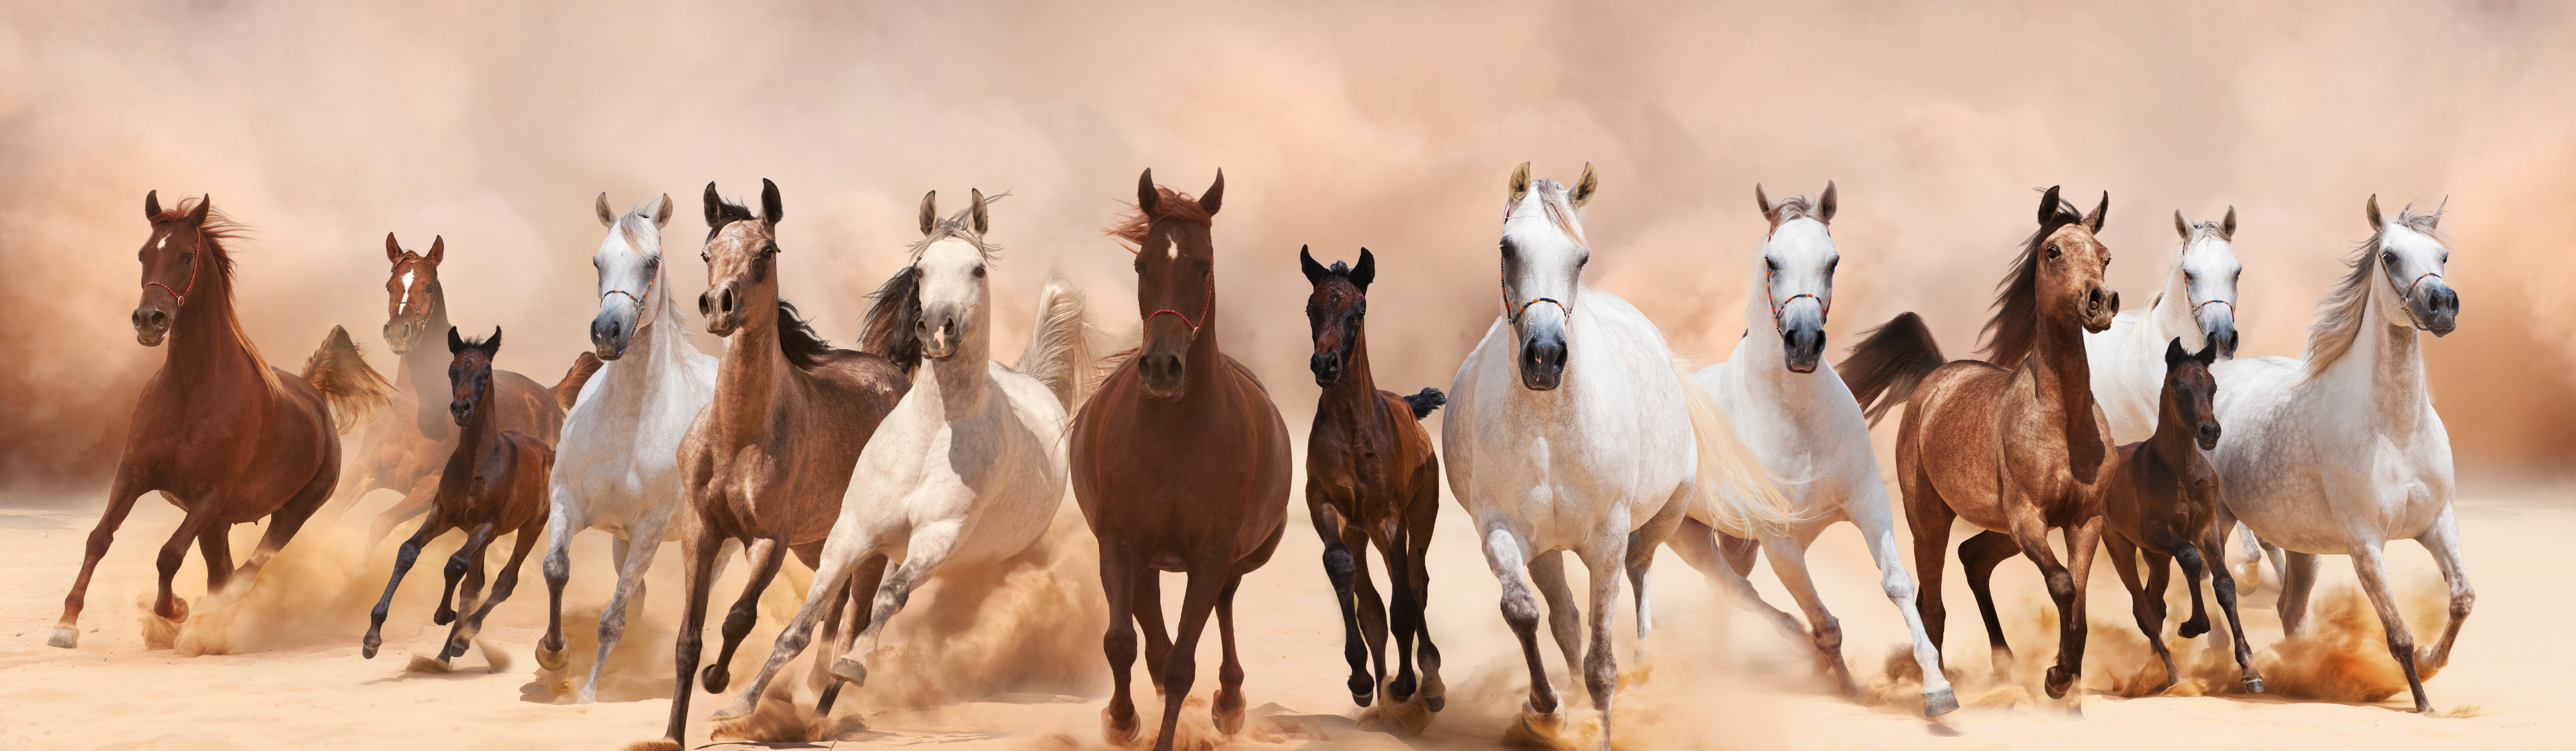 Wallpapers horse horses horse racing on the desktop